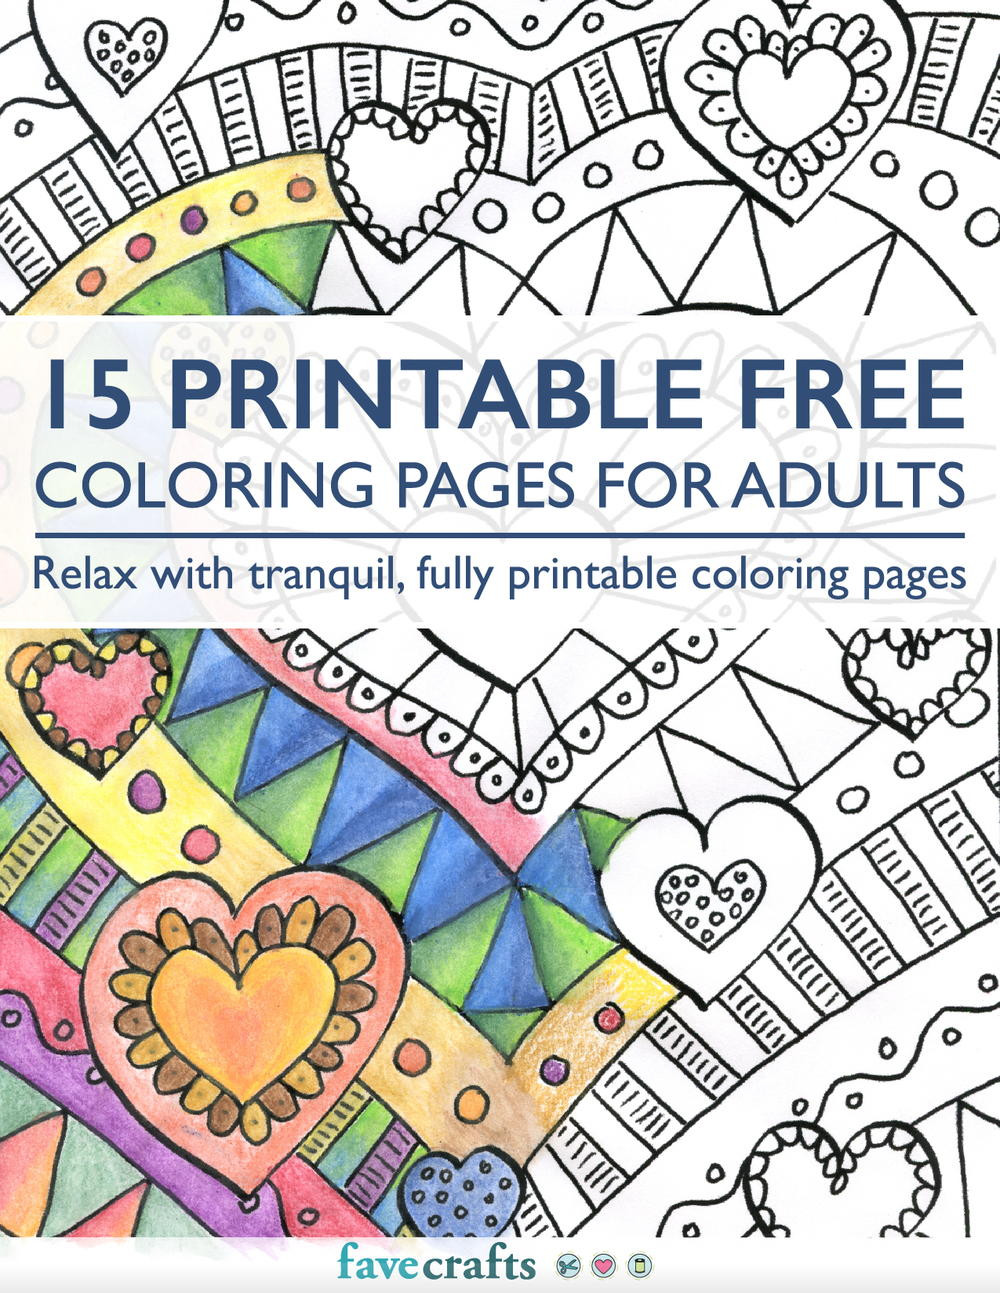 Free Adult Coloring Pages Printable
 15 Printable Free Coloring Pages for Adults [PDF